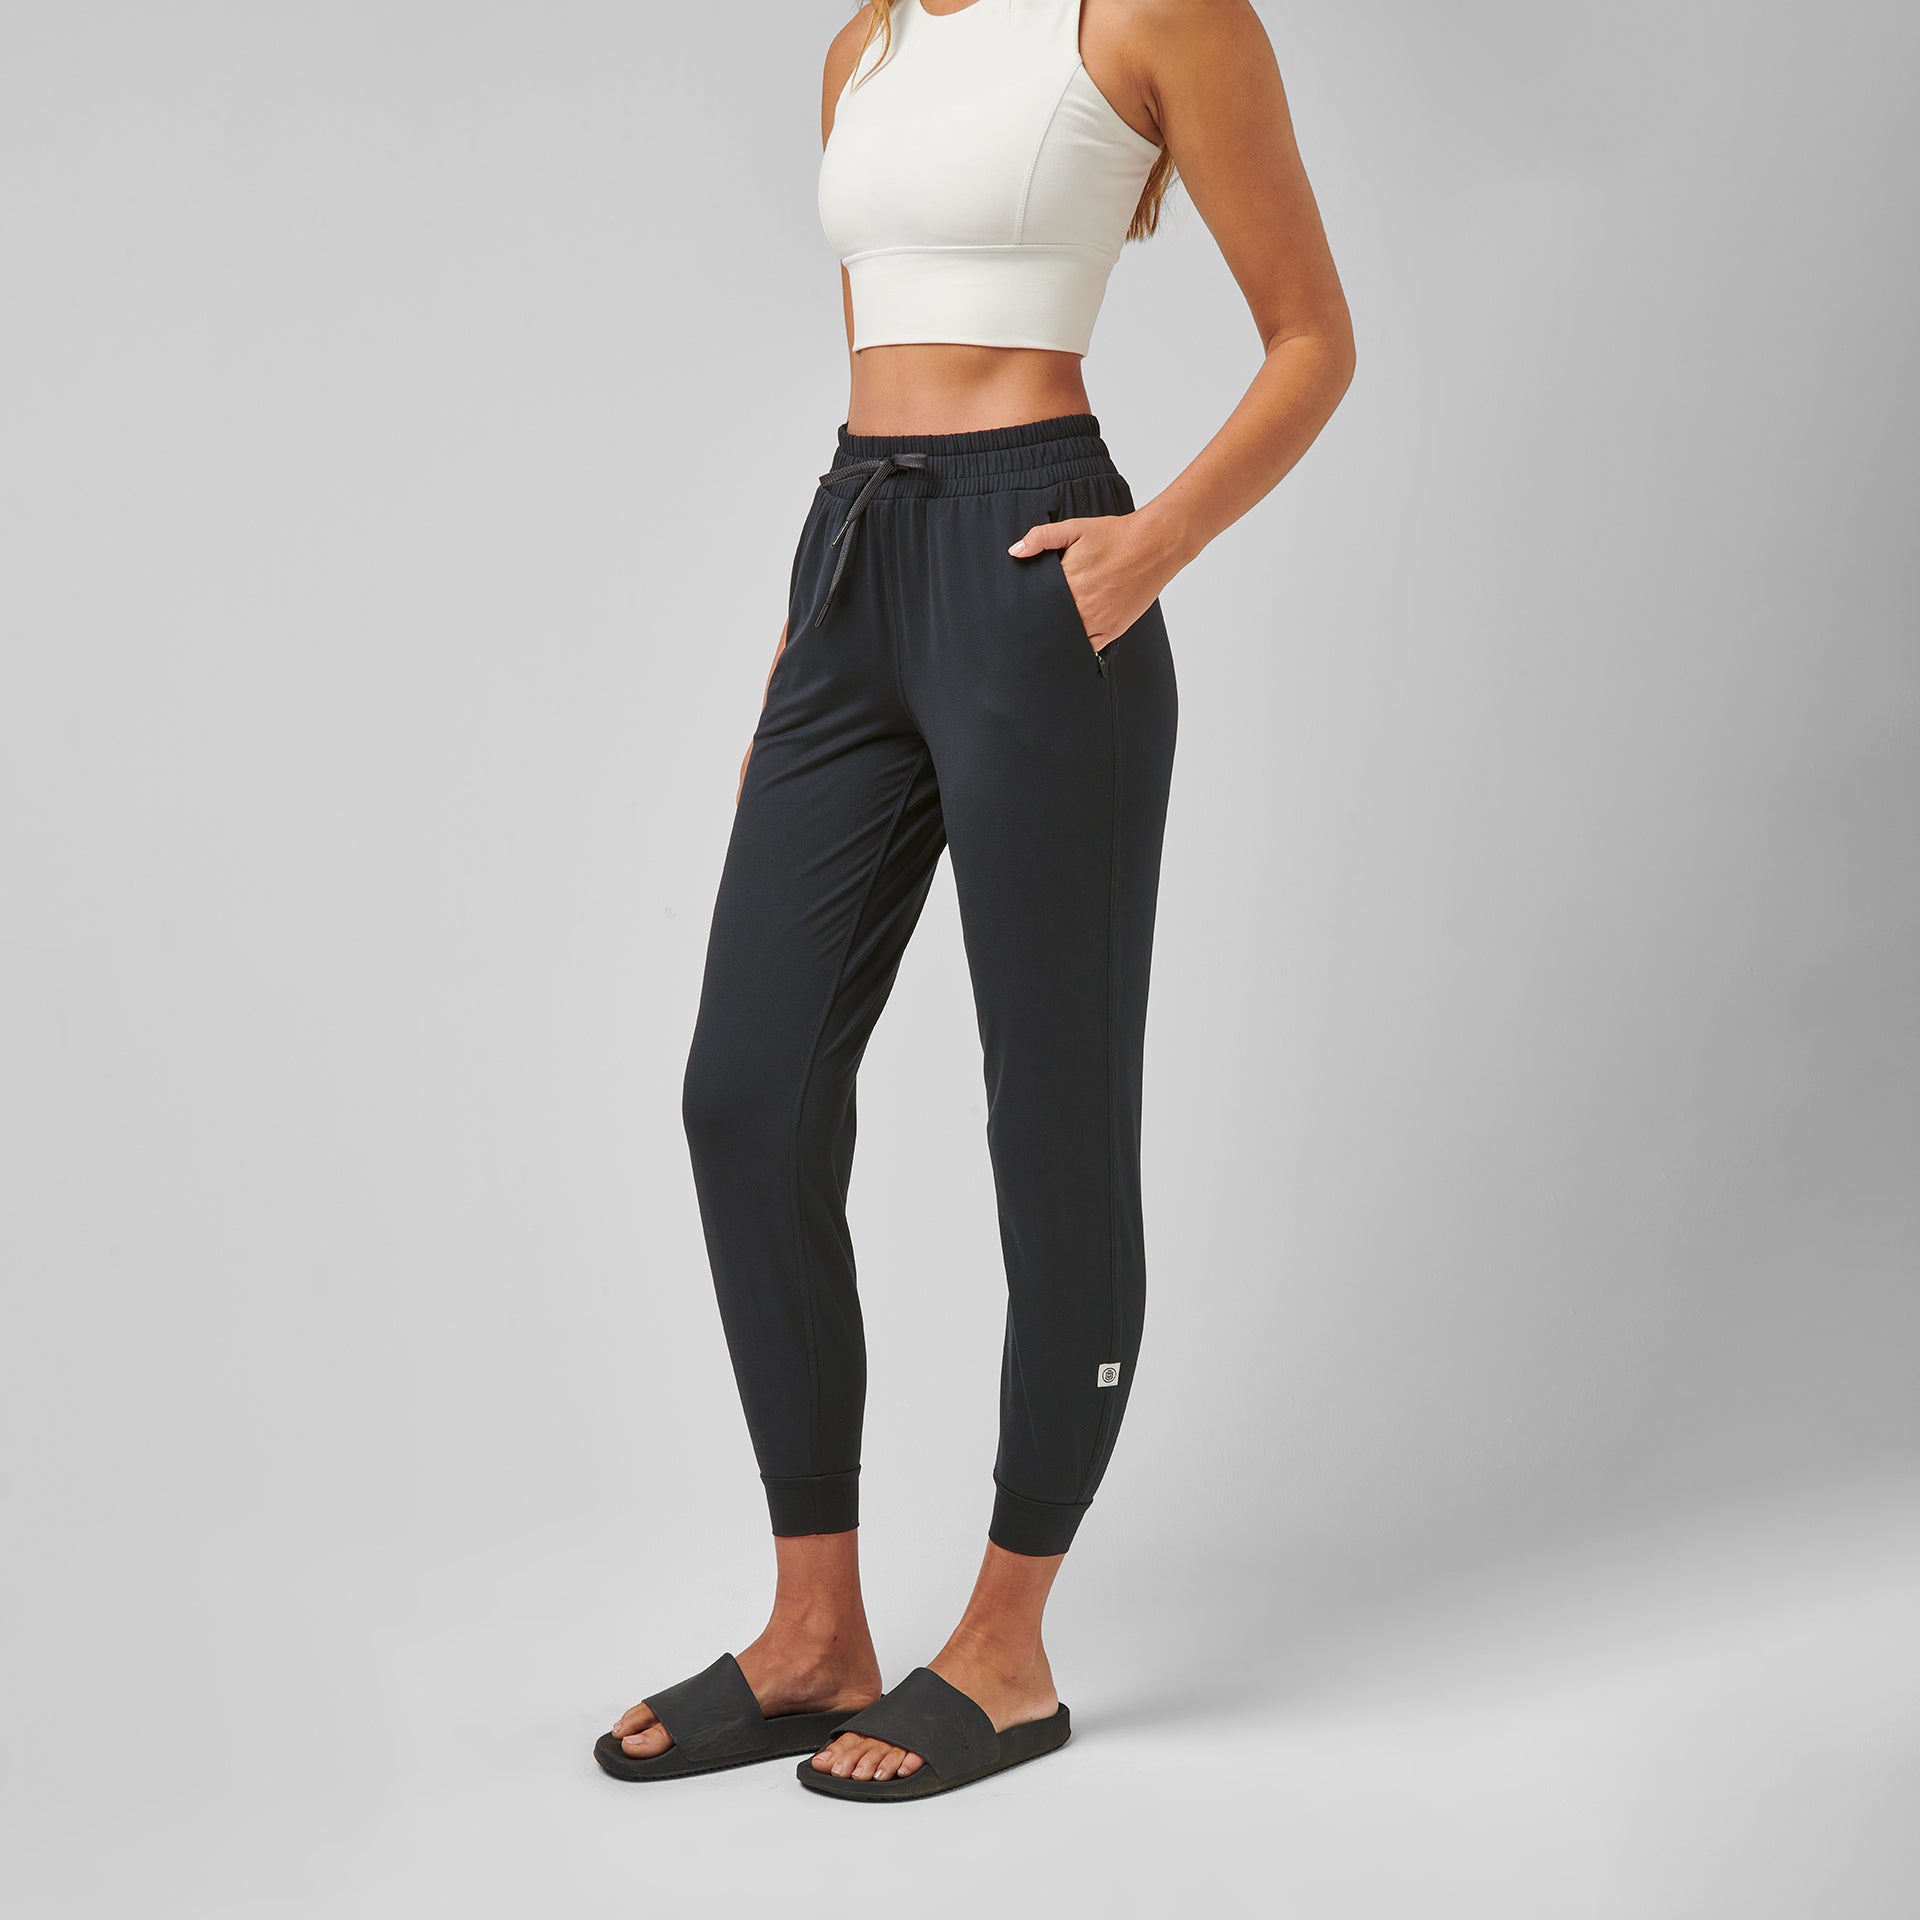 Wholesale THE GYM PEOPLE Women's Joggers Pants Lightweight